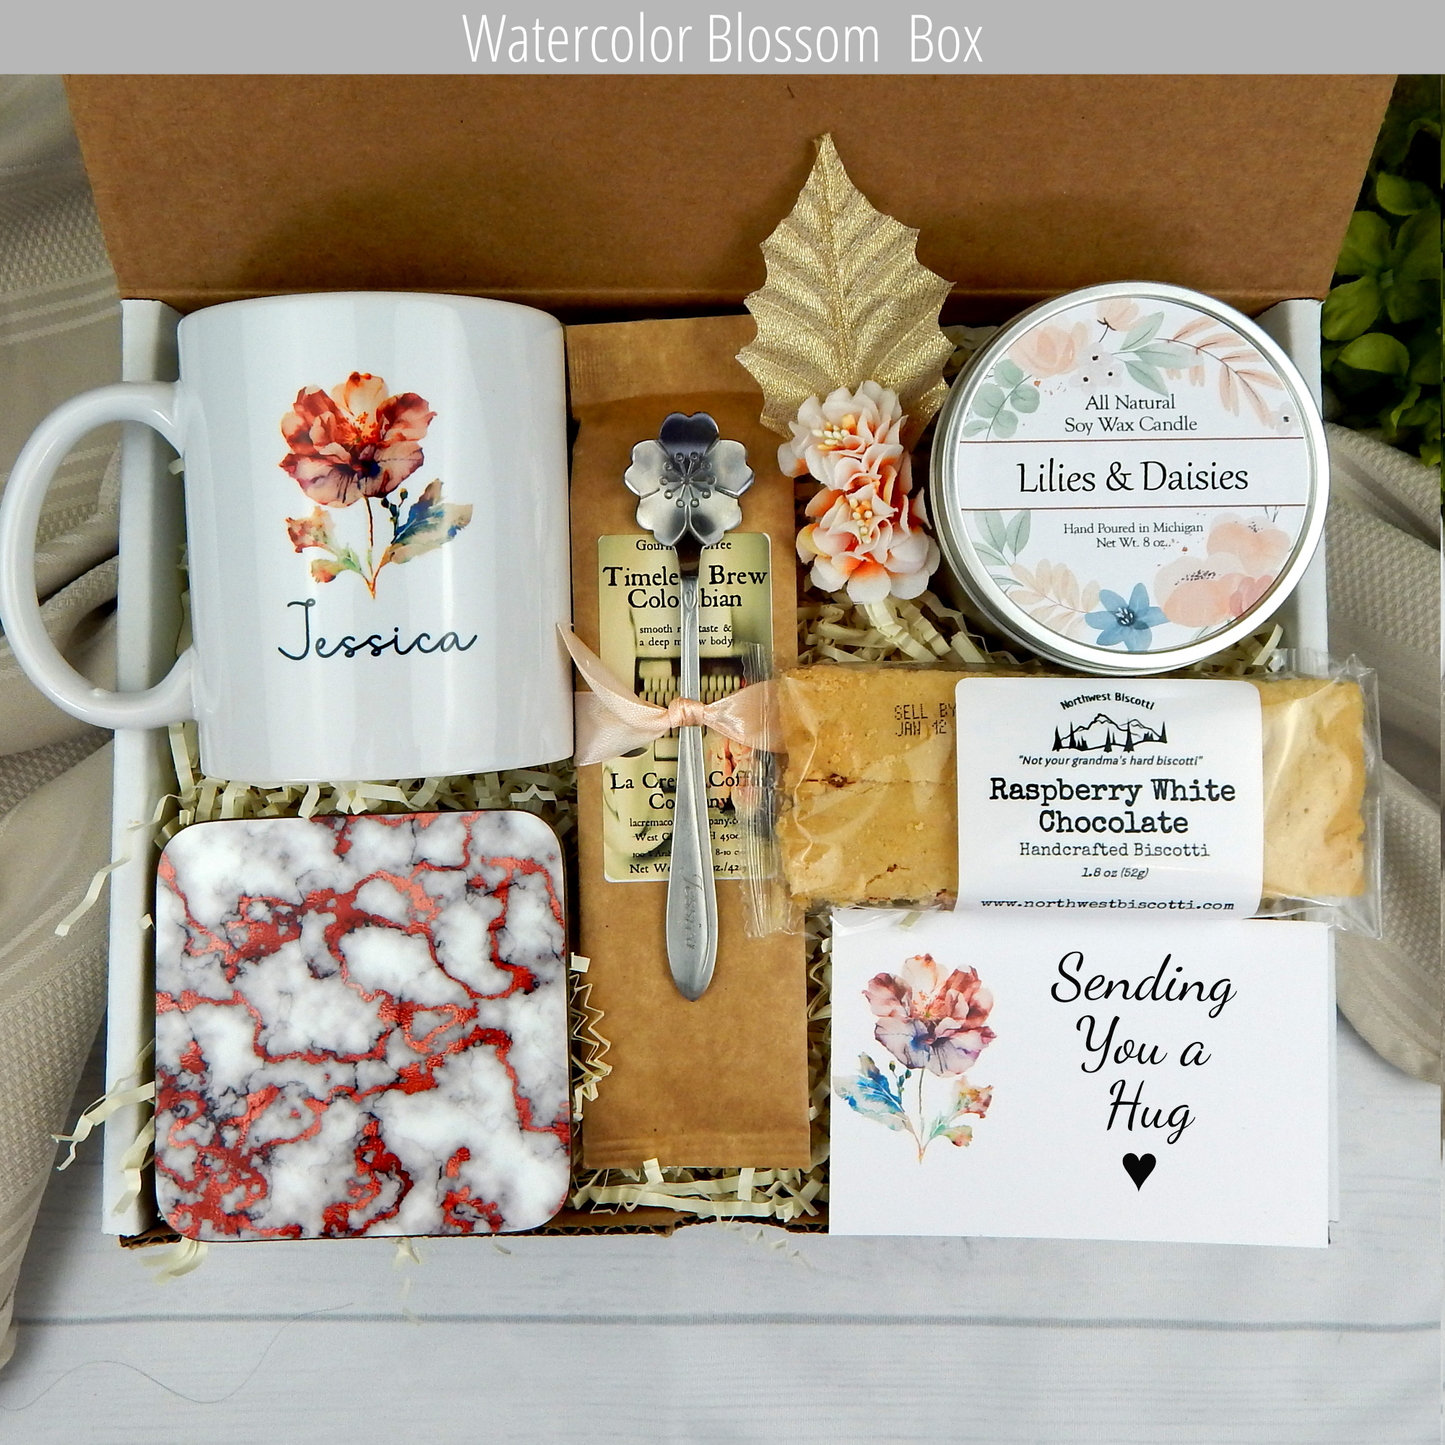 Heartfelt wishes: Encouragement gift basket with a custom mug, coffee, and scrumptious goodies for her.